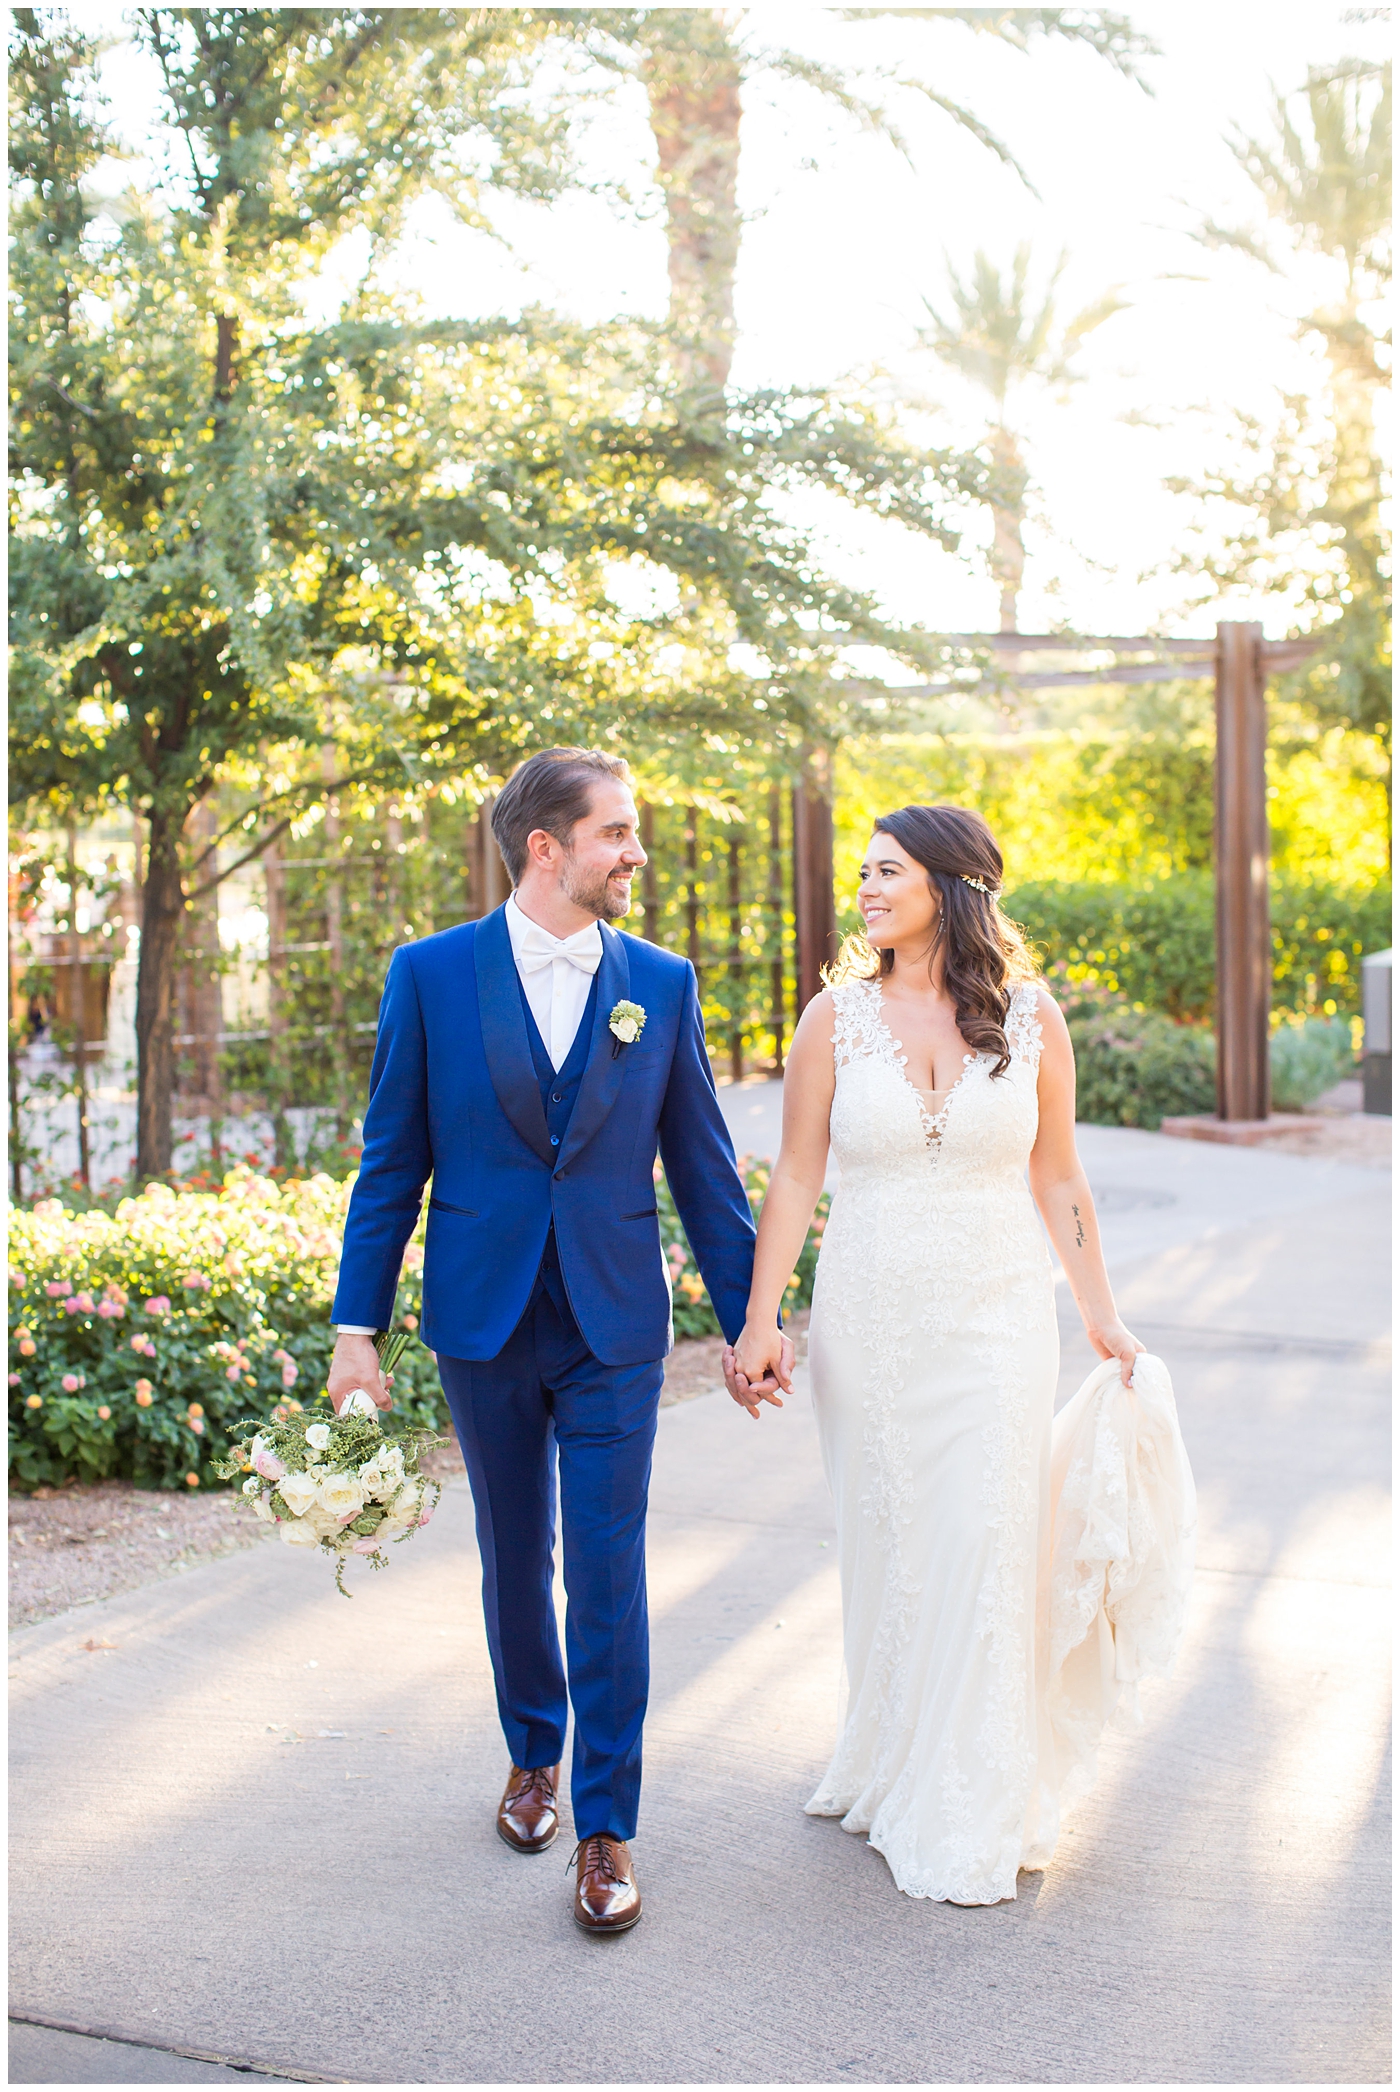 Bride in Sincerity bridal dress with groom in custom blue suit holding hands